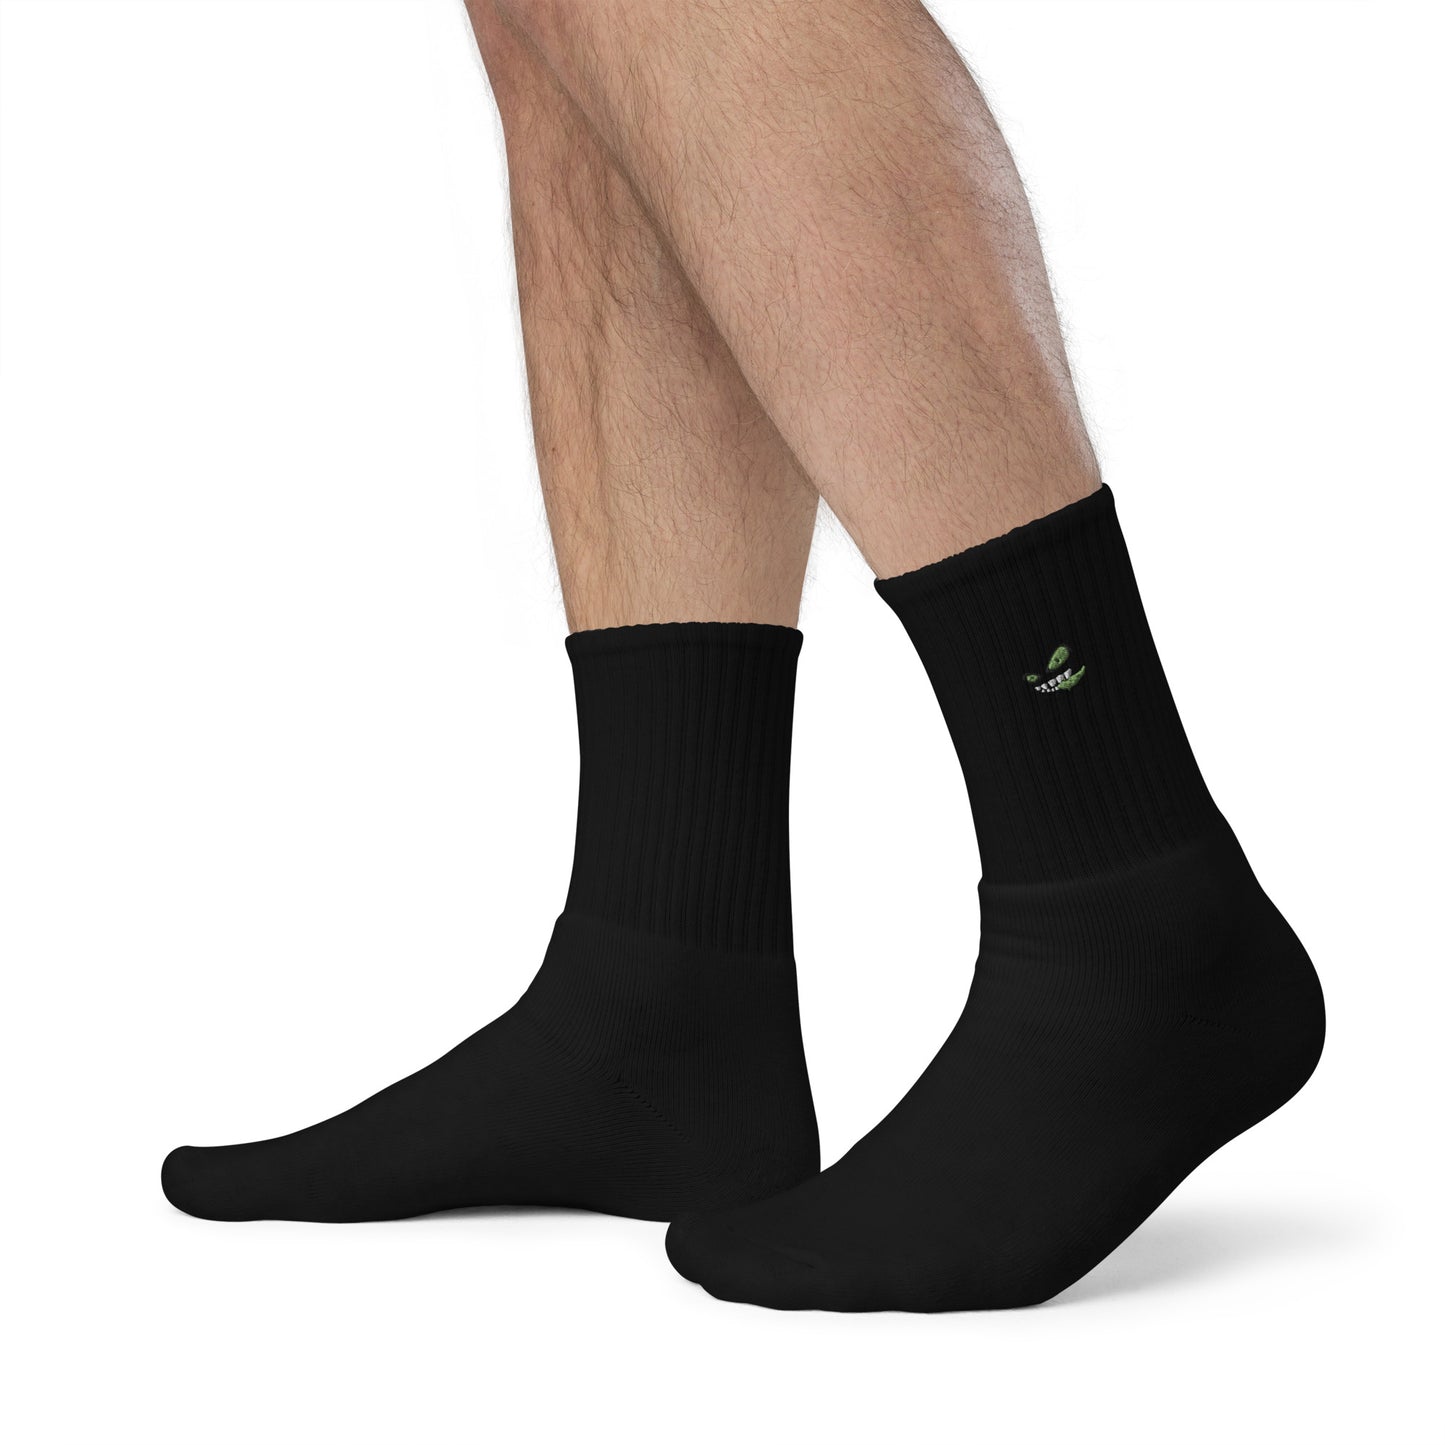 socks-from-the-side-with-monster-symbol